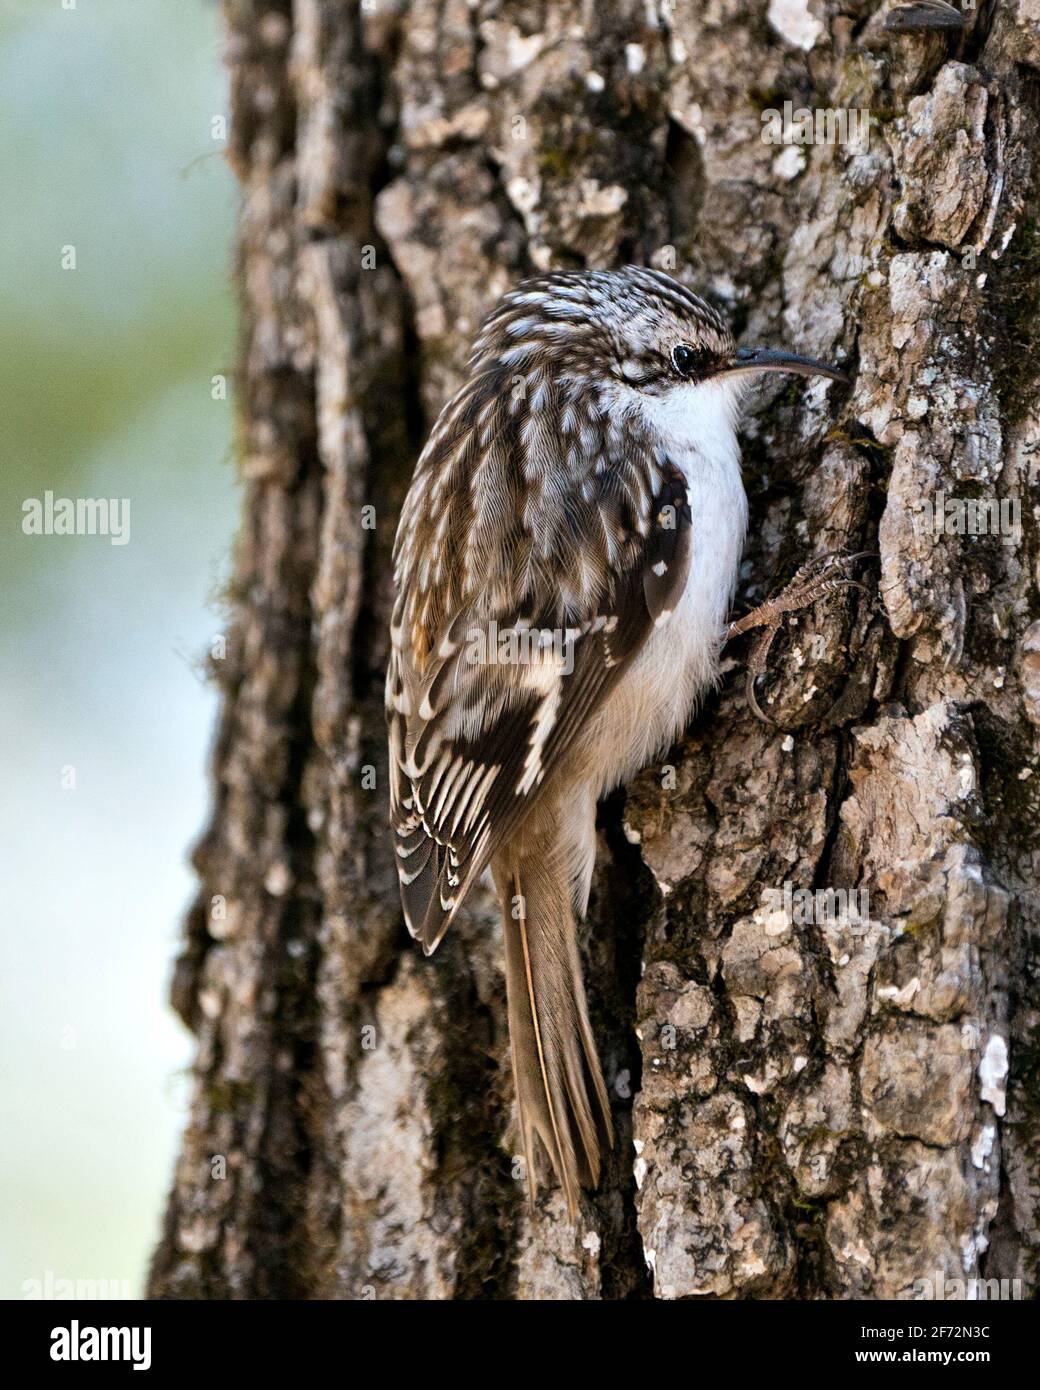 Tree Creeper bird close-up on a tree trunk looking for insect in its environment and habitat and displaying camouflage brown feathers, curved claws. Stock Photo